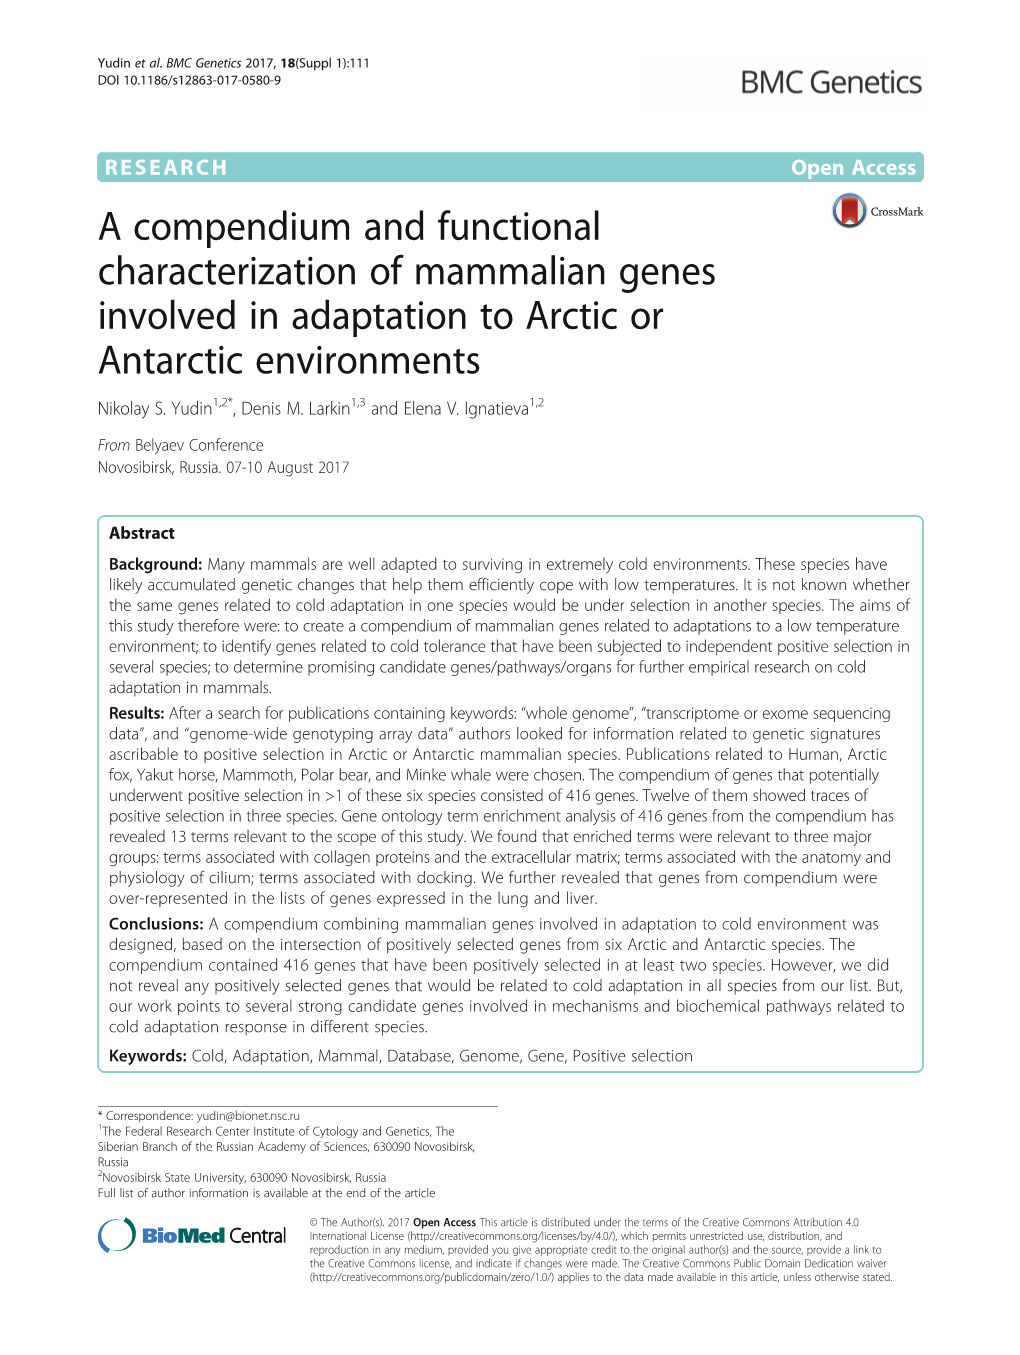 A Compendium and Functional Characterization of Mammalian Genes Involved in Adaptation to Arctic Or Antarctic Environments Nikolay S